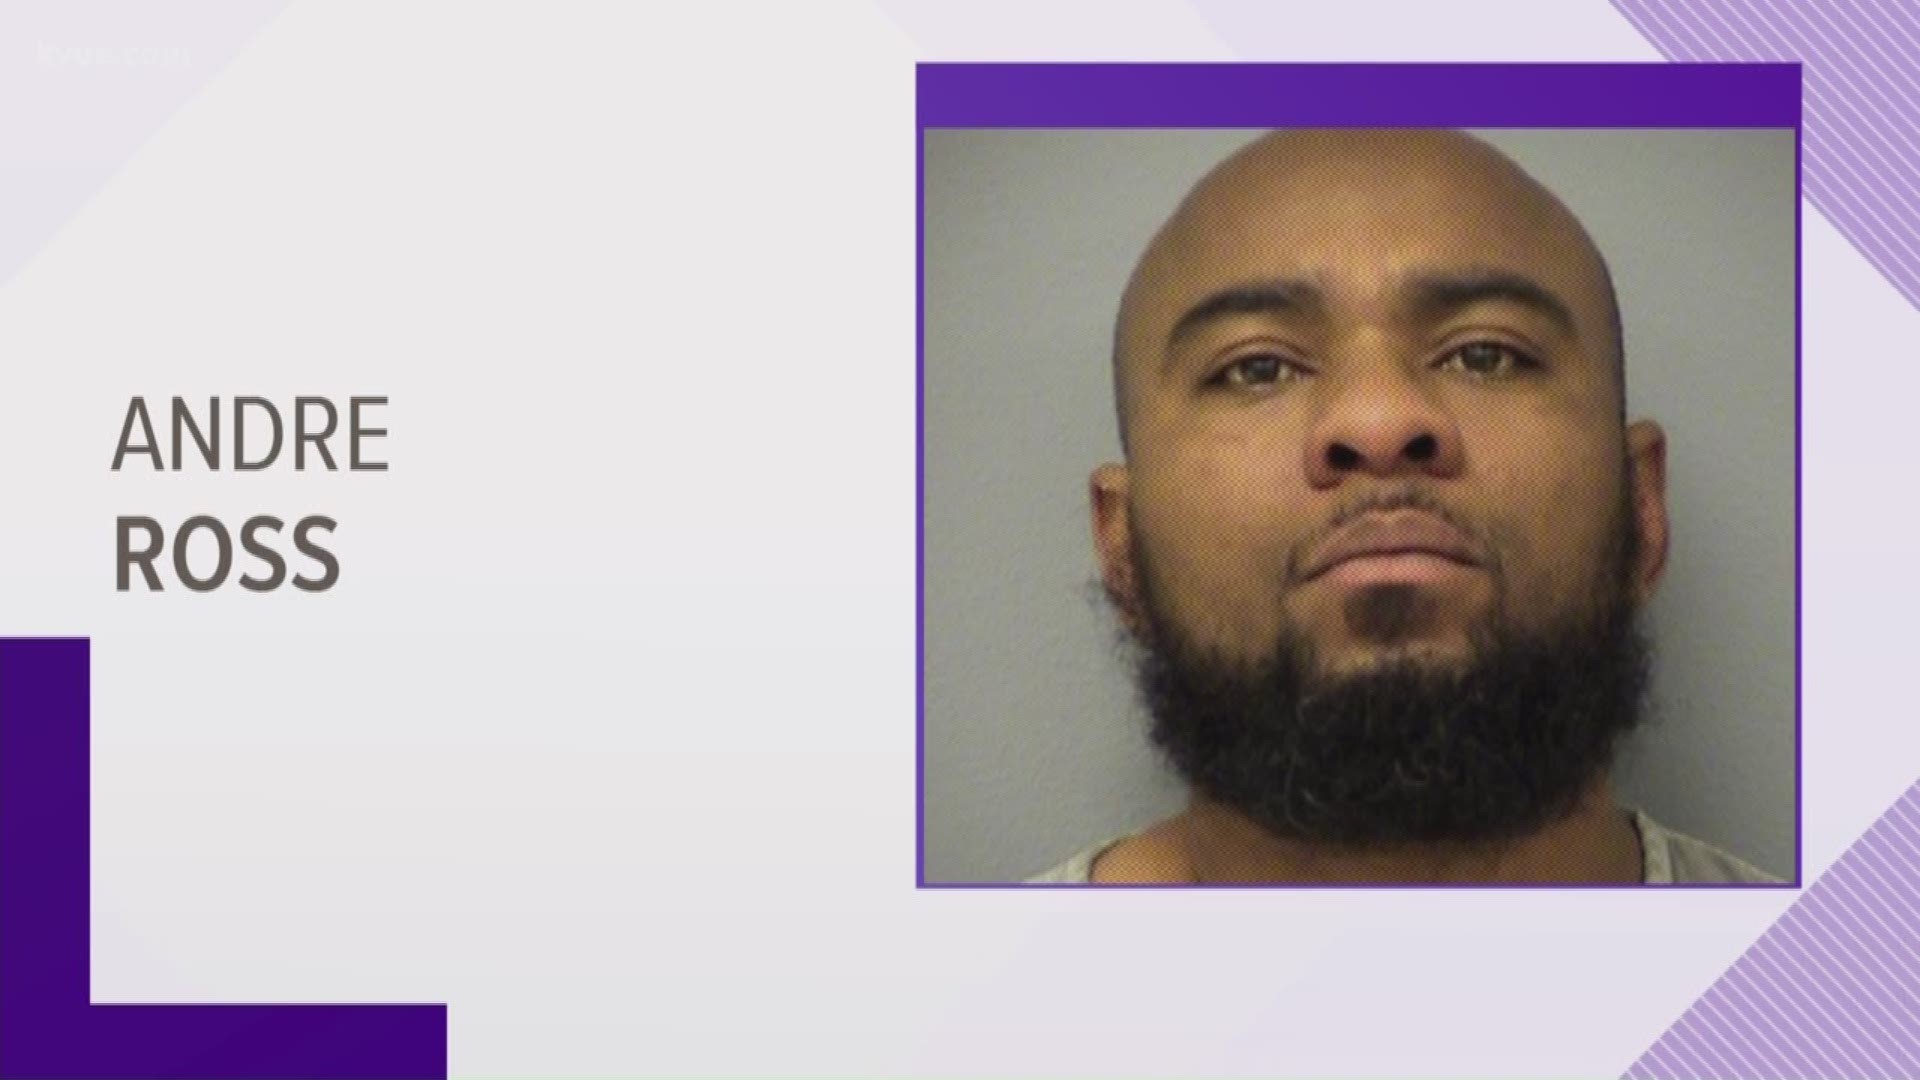 Andre Ross, 44, has been arrested after a deadly shooting in eastern Travis County on Monday night.